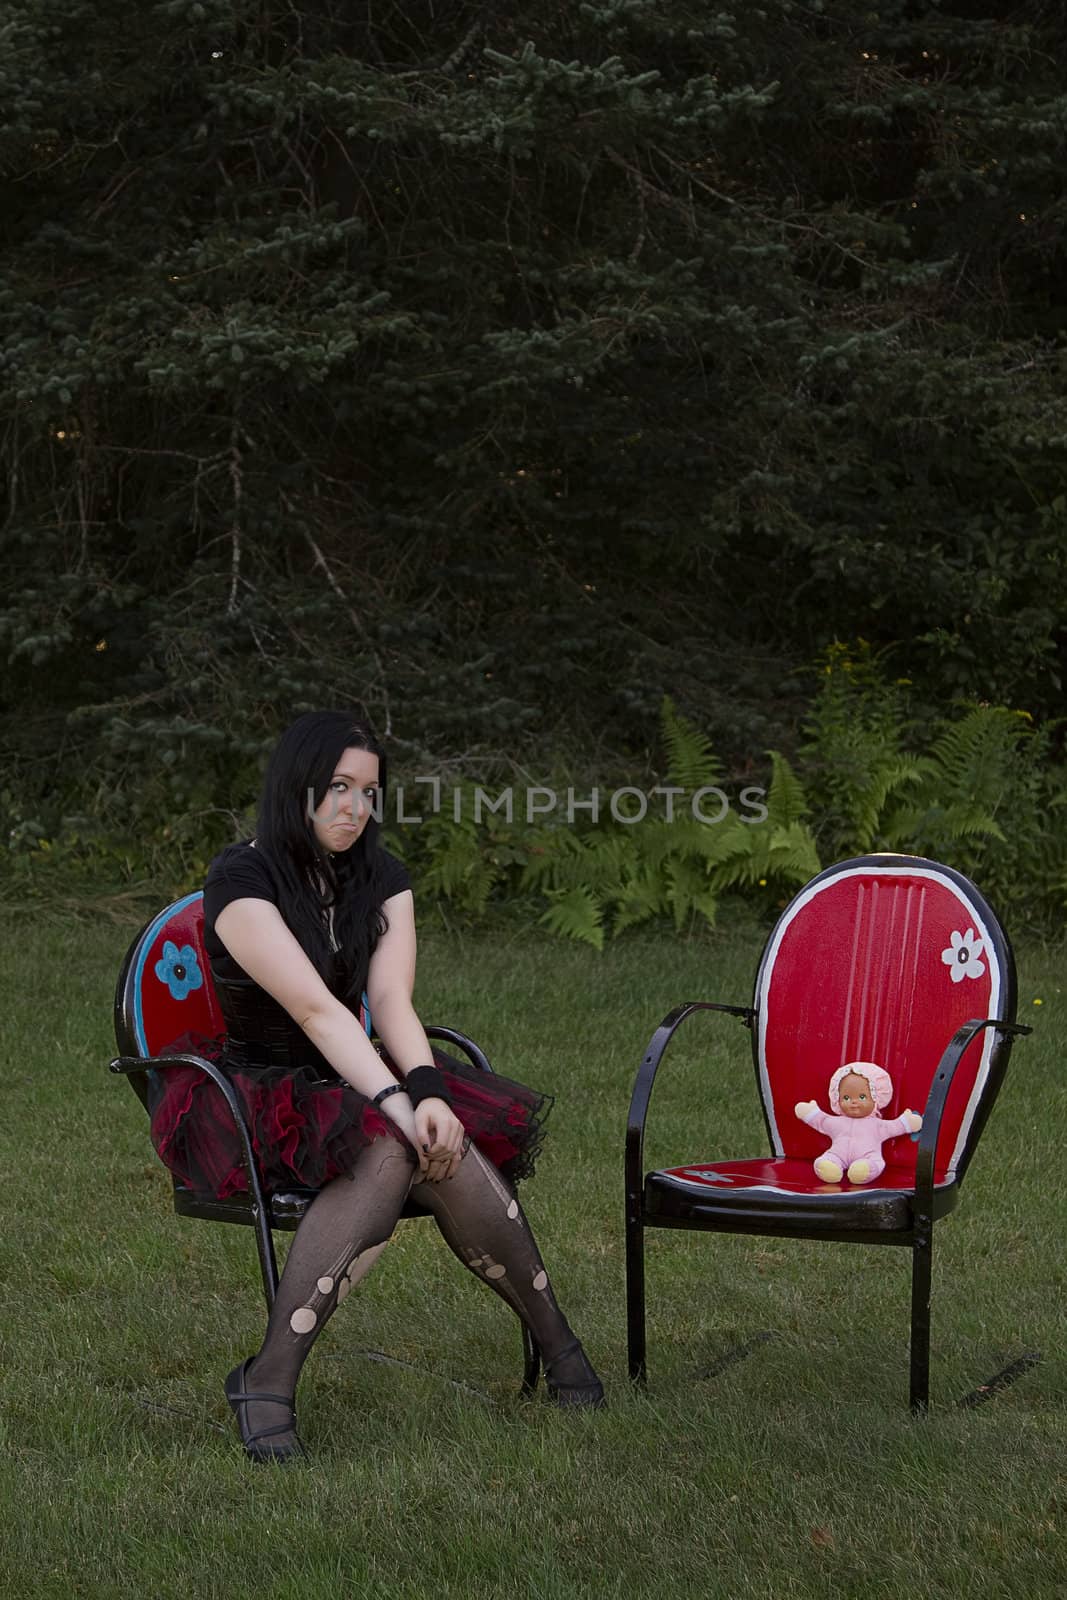 early twenty women wearing goth style clothes sitting on a lawn chair with her baby doll sitting in a lawn chair beside her